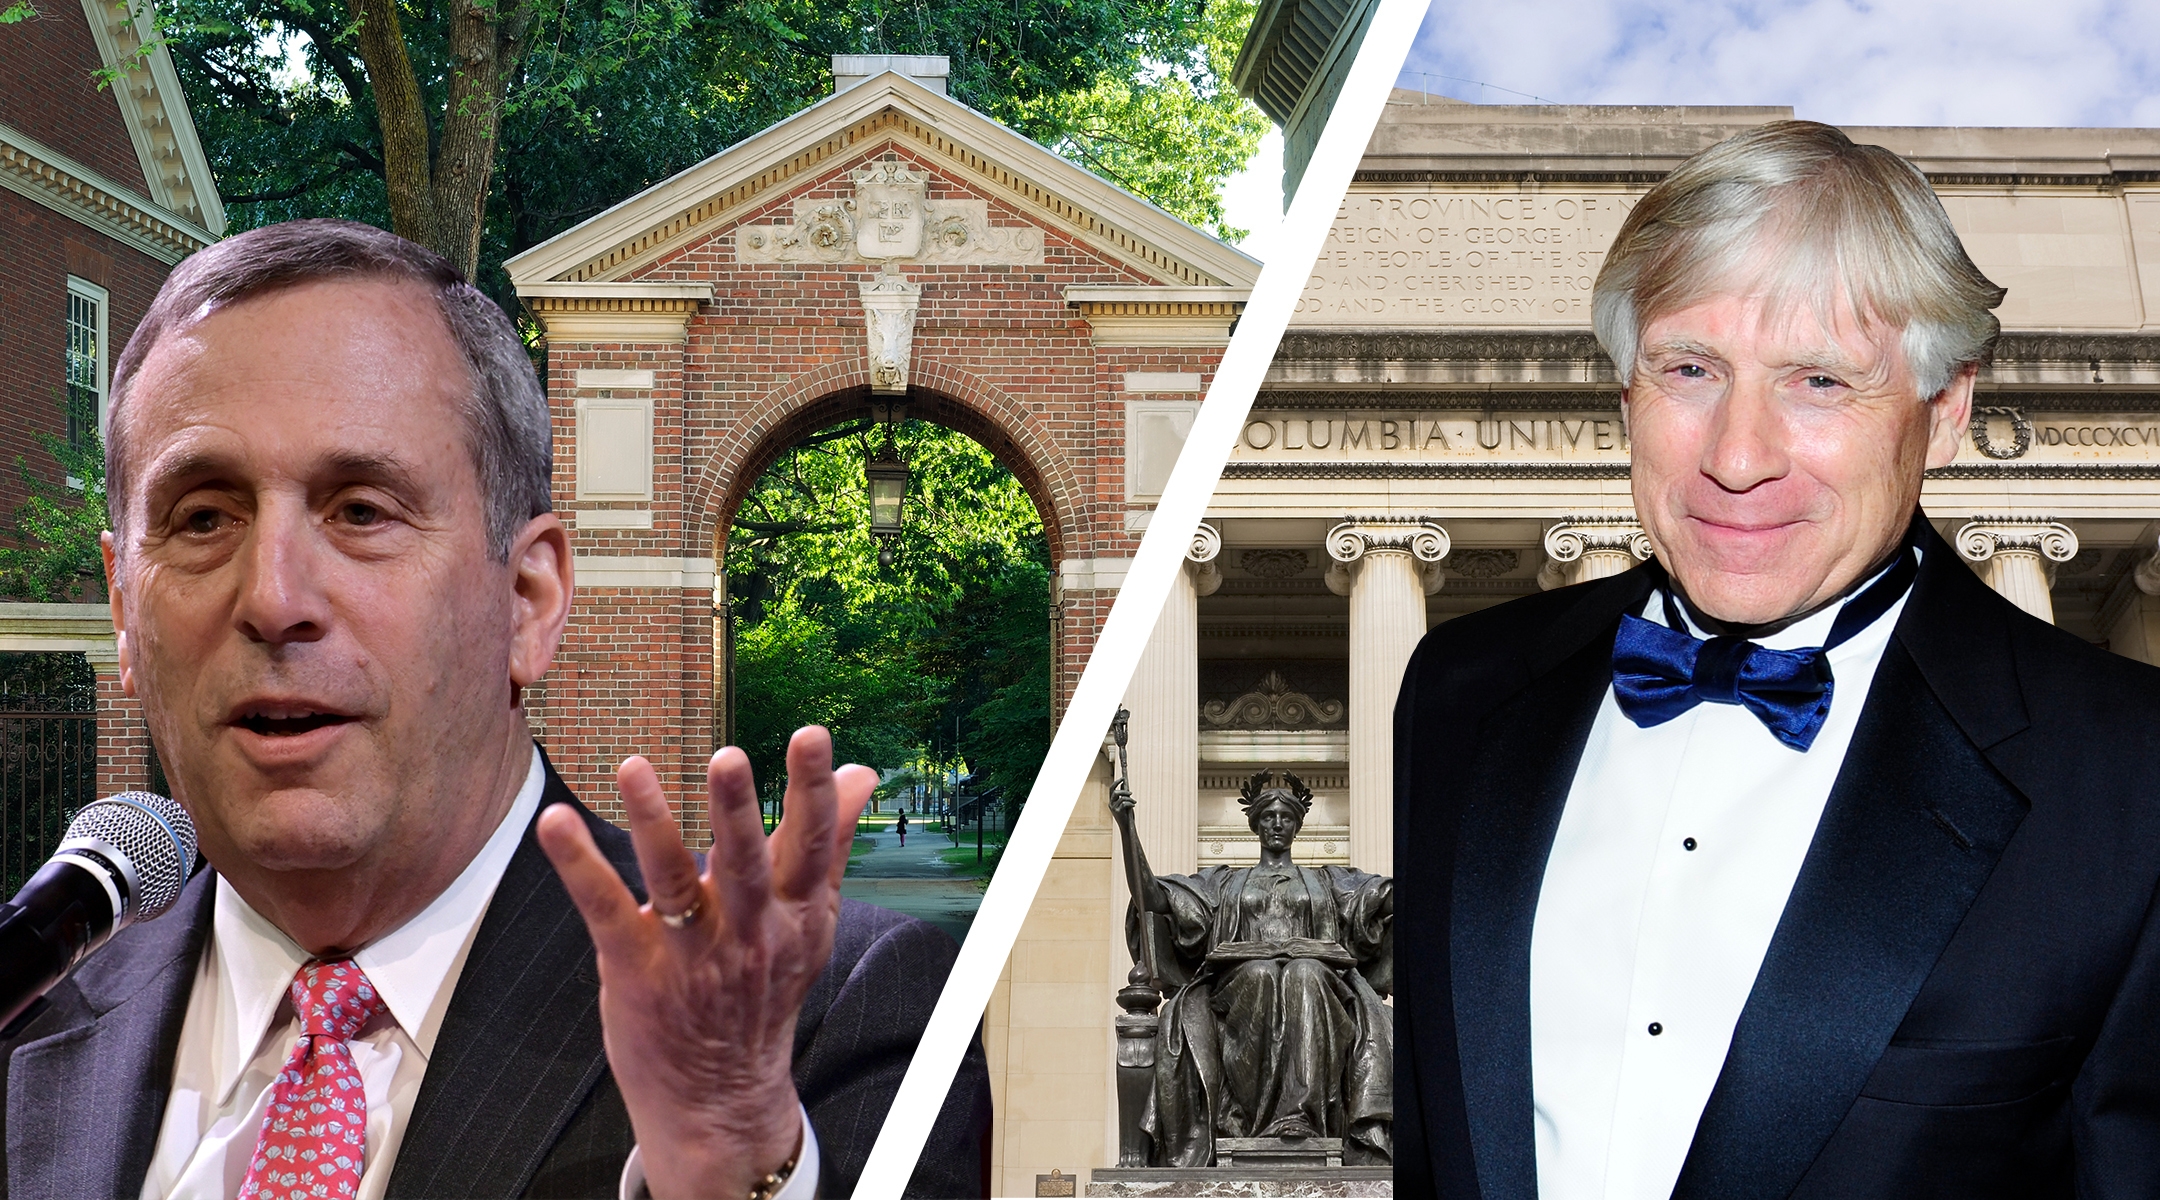 Lawrence Bacow, president at Harvard, and Lee Bollinger, president at Columbia, have announced that they will exit their posts in 2023.(Getty Images/Design by Mollie Suss)